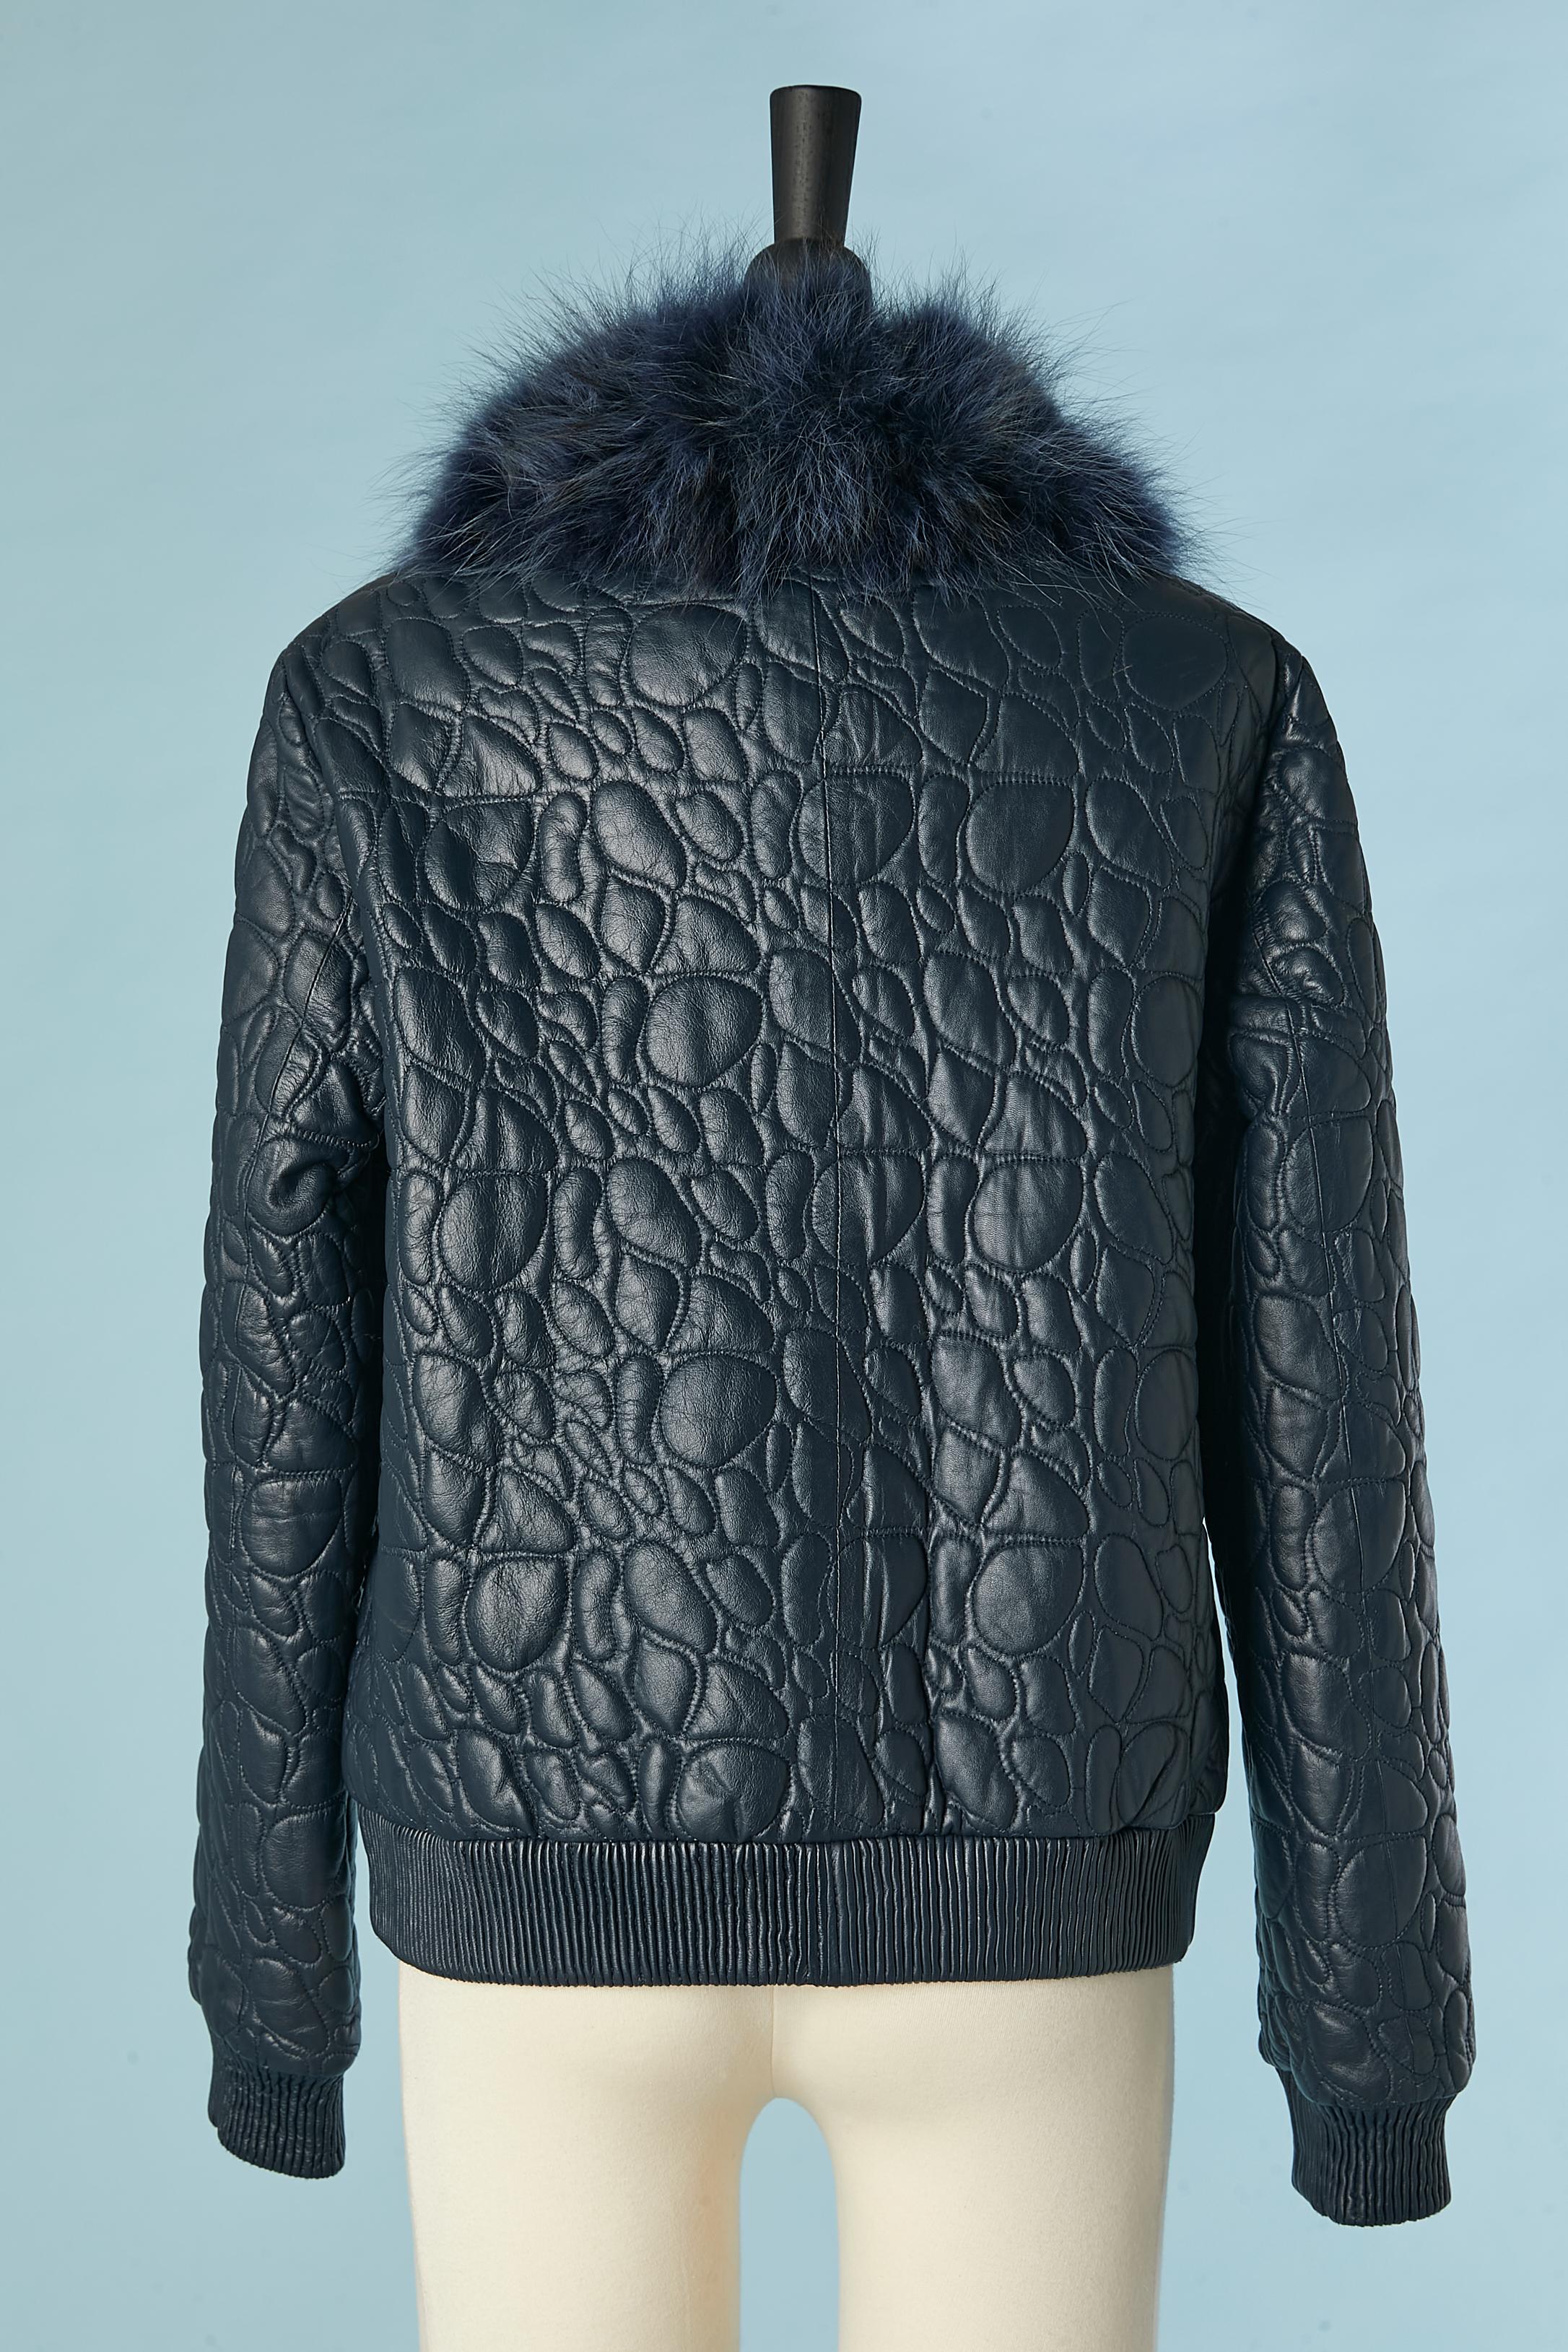 Blue leather top-stitched jacket with detachable fur collar TRU TRUSSARDI  For Sale 2